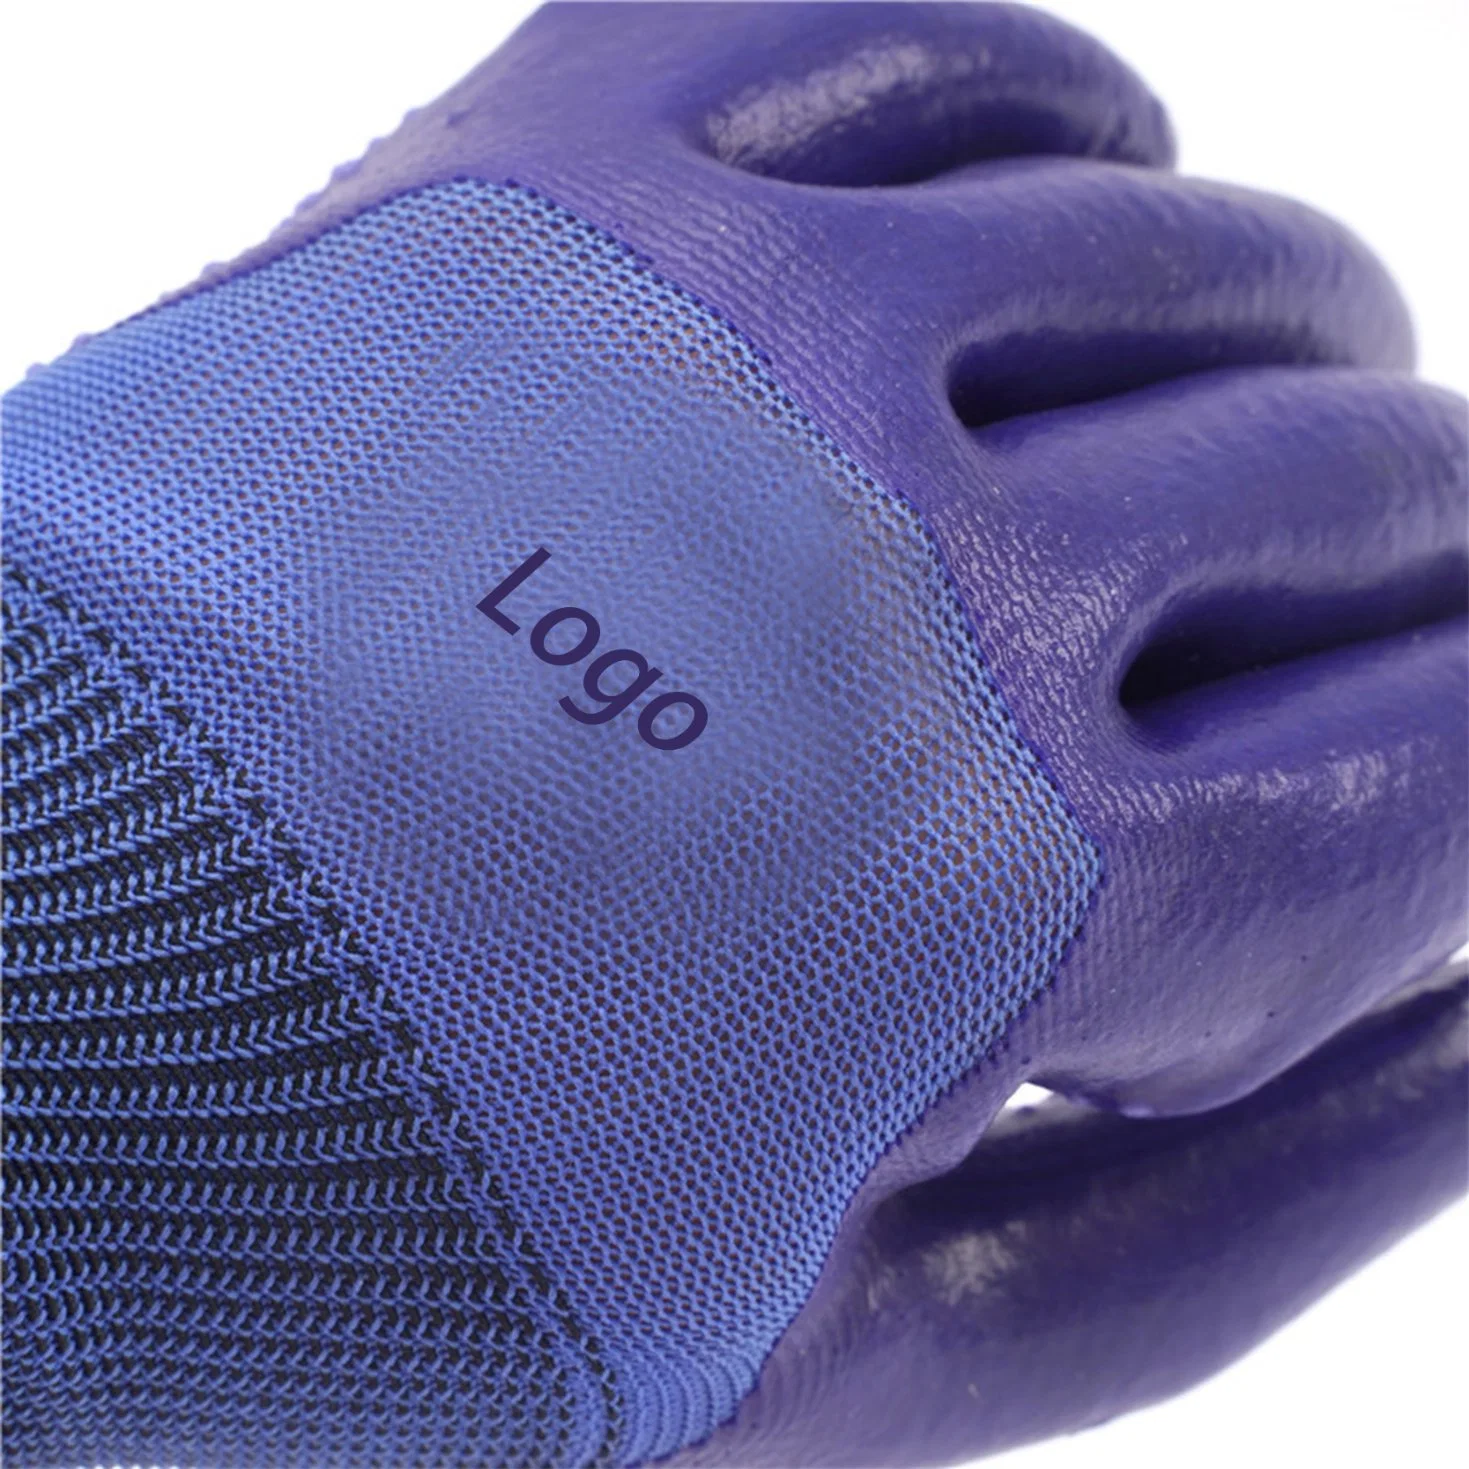 Custom Made Anti-Slip Protective Full Dipping PVC Coated Working Gloves General Purpose Work Safety Gloves with PVC Dots